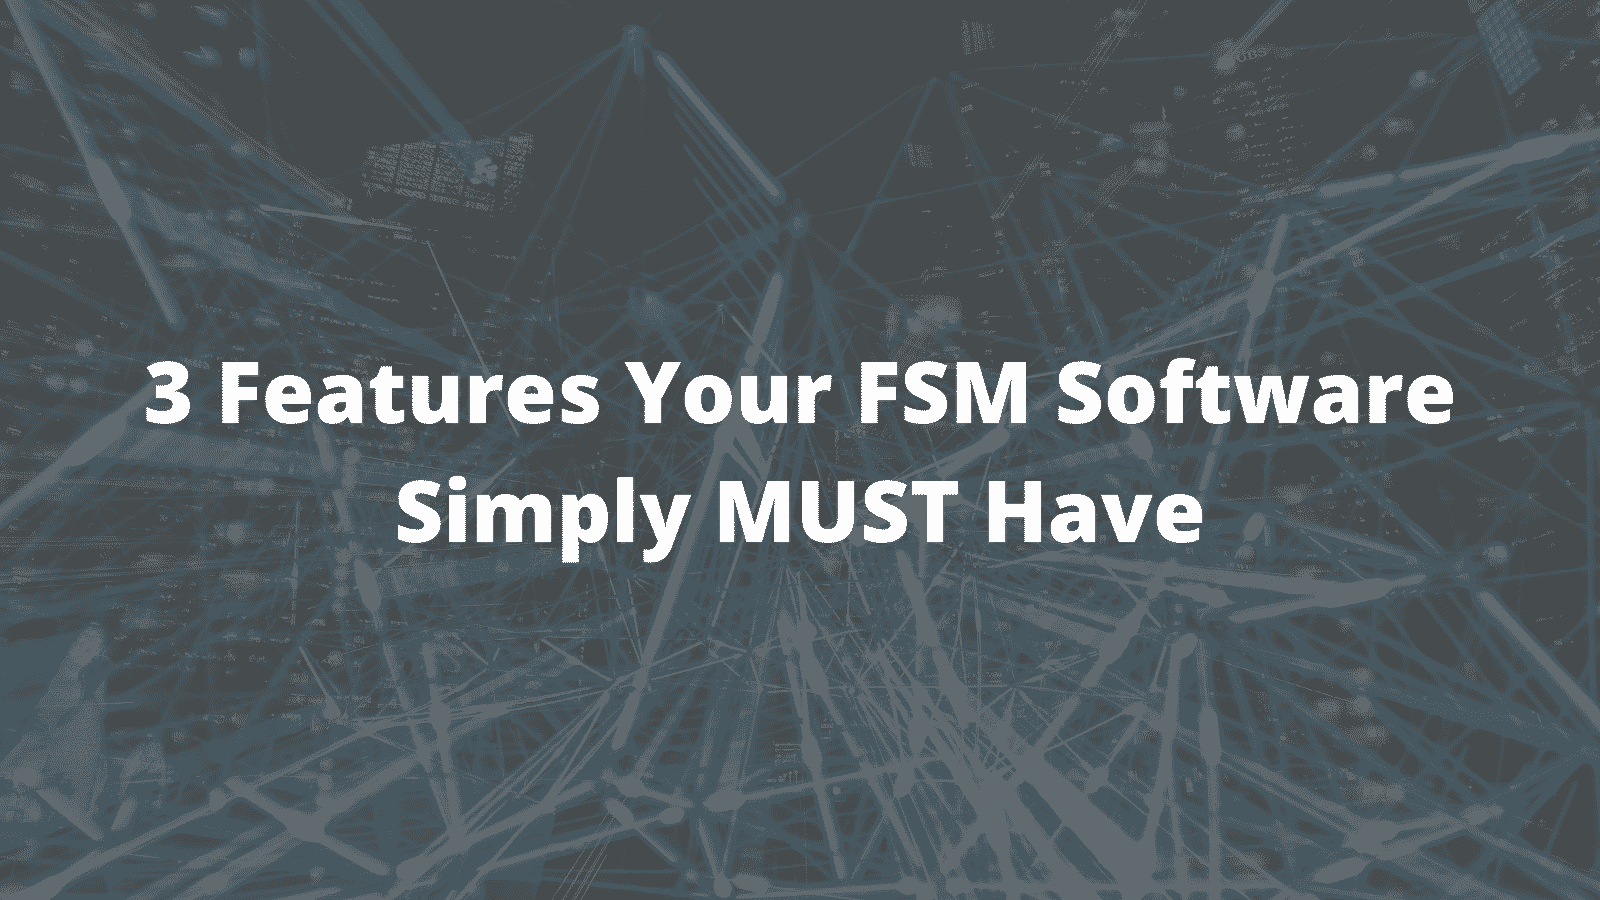 3 Features Your FSM Software Simply MUST Have